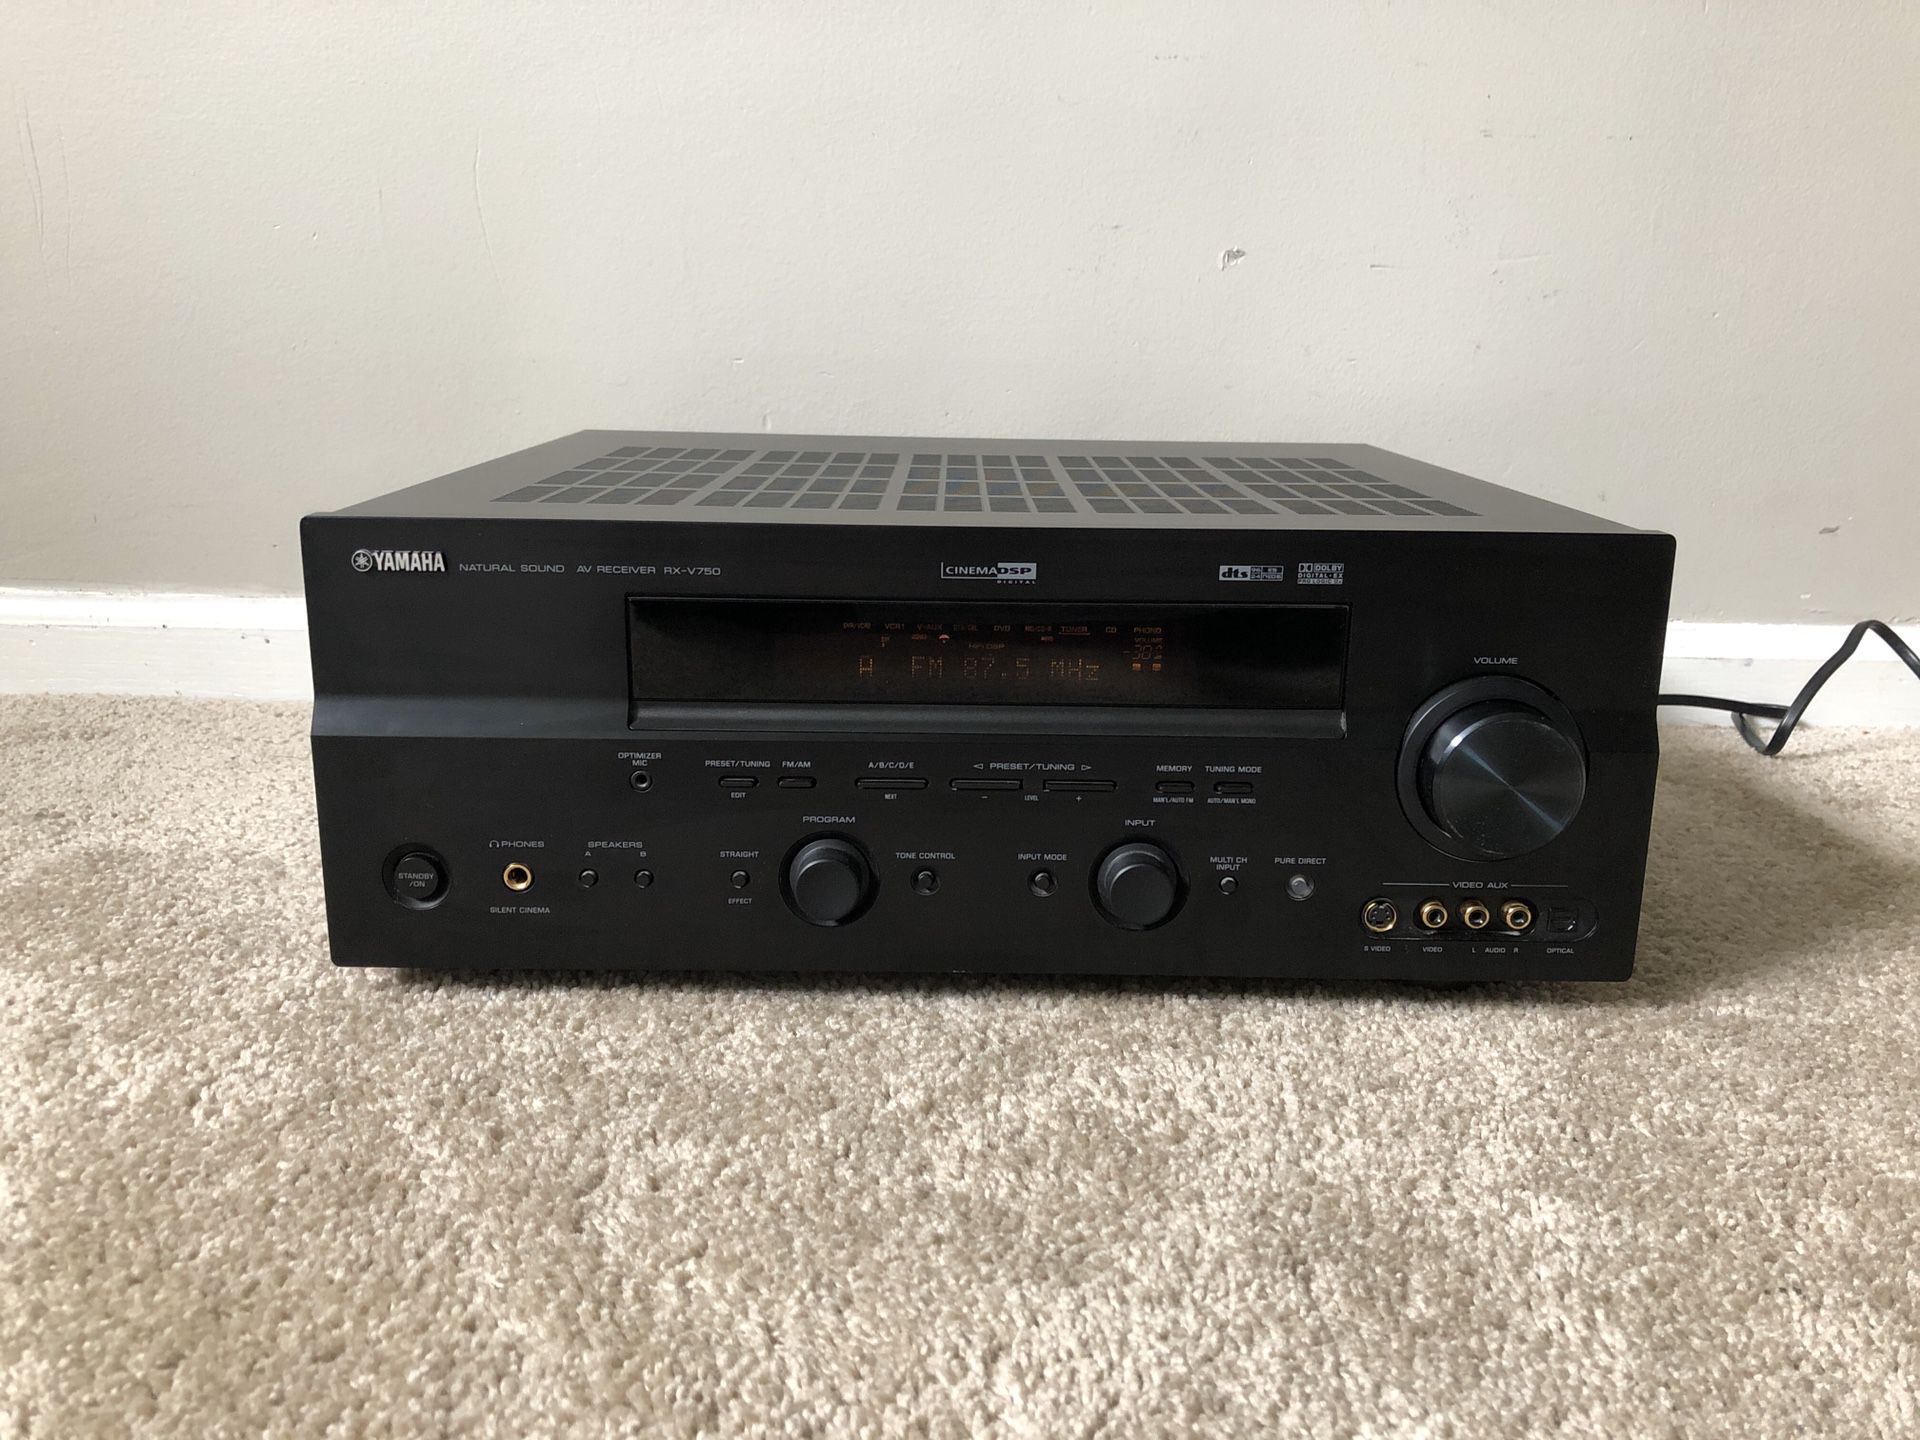 Yamaha RX-V750 7.1 Home Theater Surround Receiver